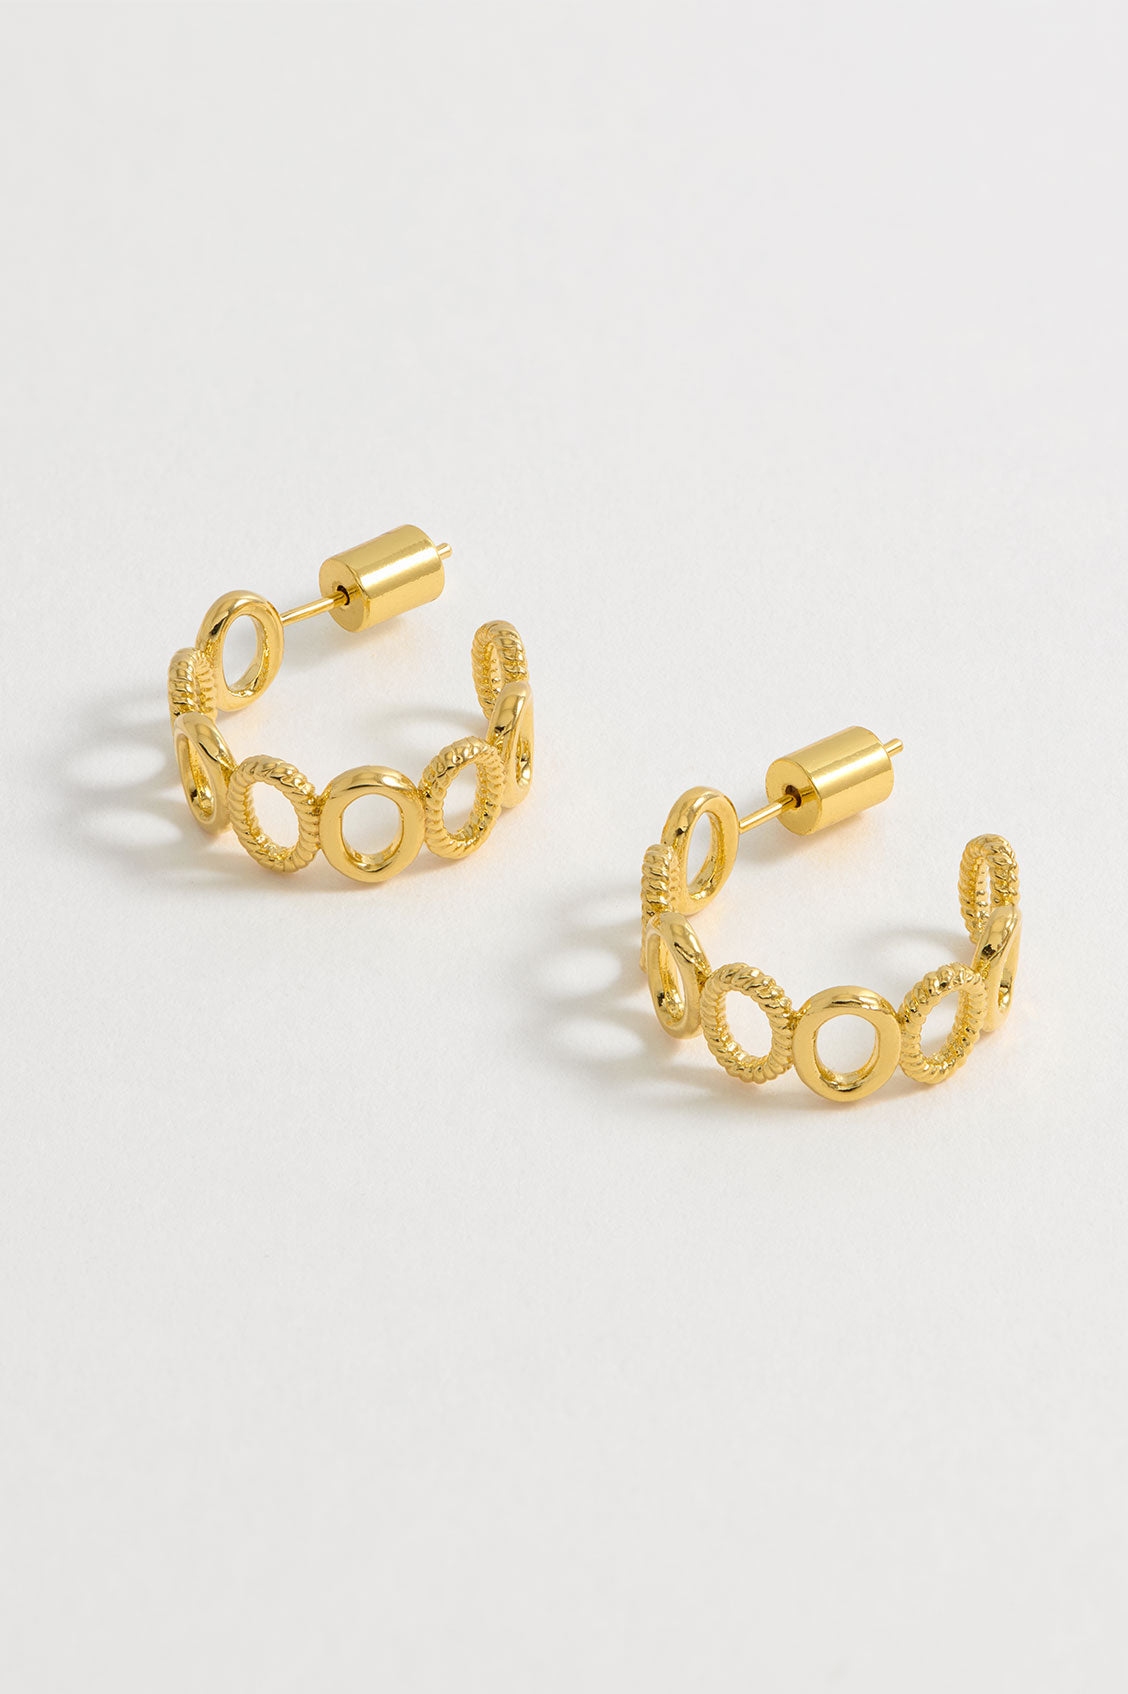 Textured Oval Hoops